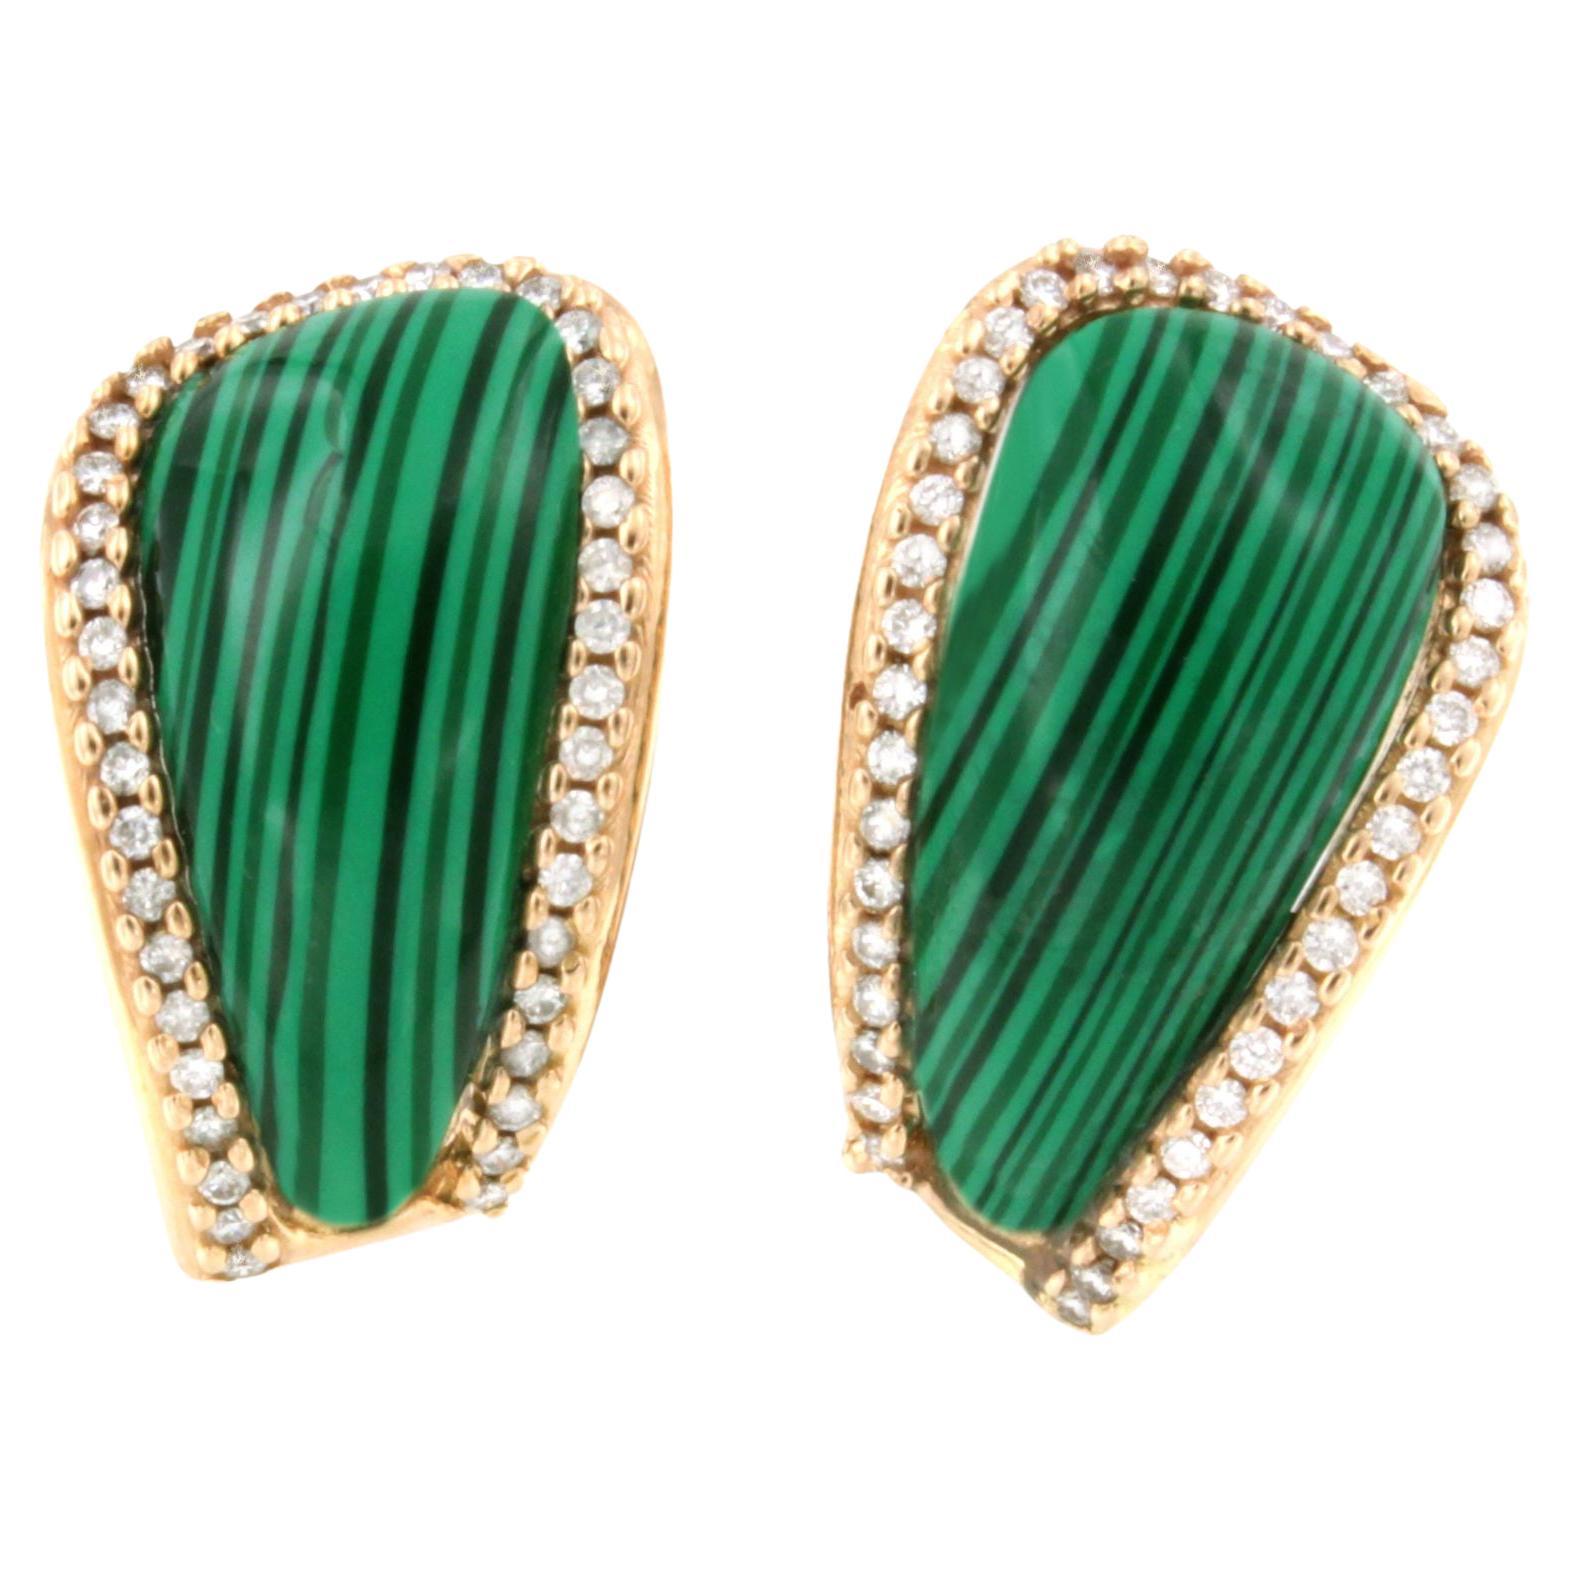 18Kt Rose Gold with White Diamonds and Malachite Modern Amazing Earrings